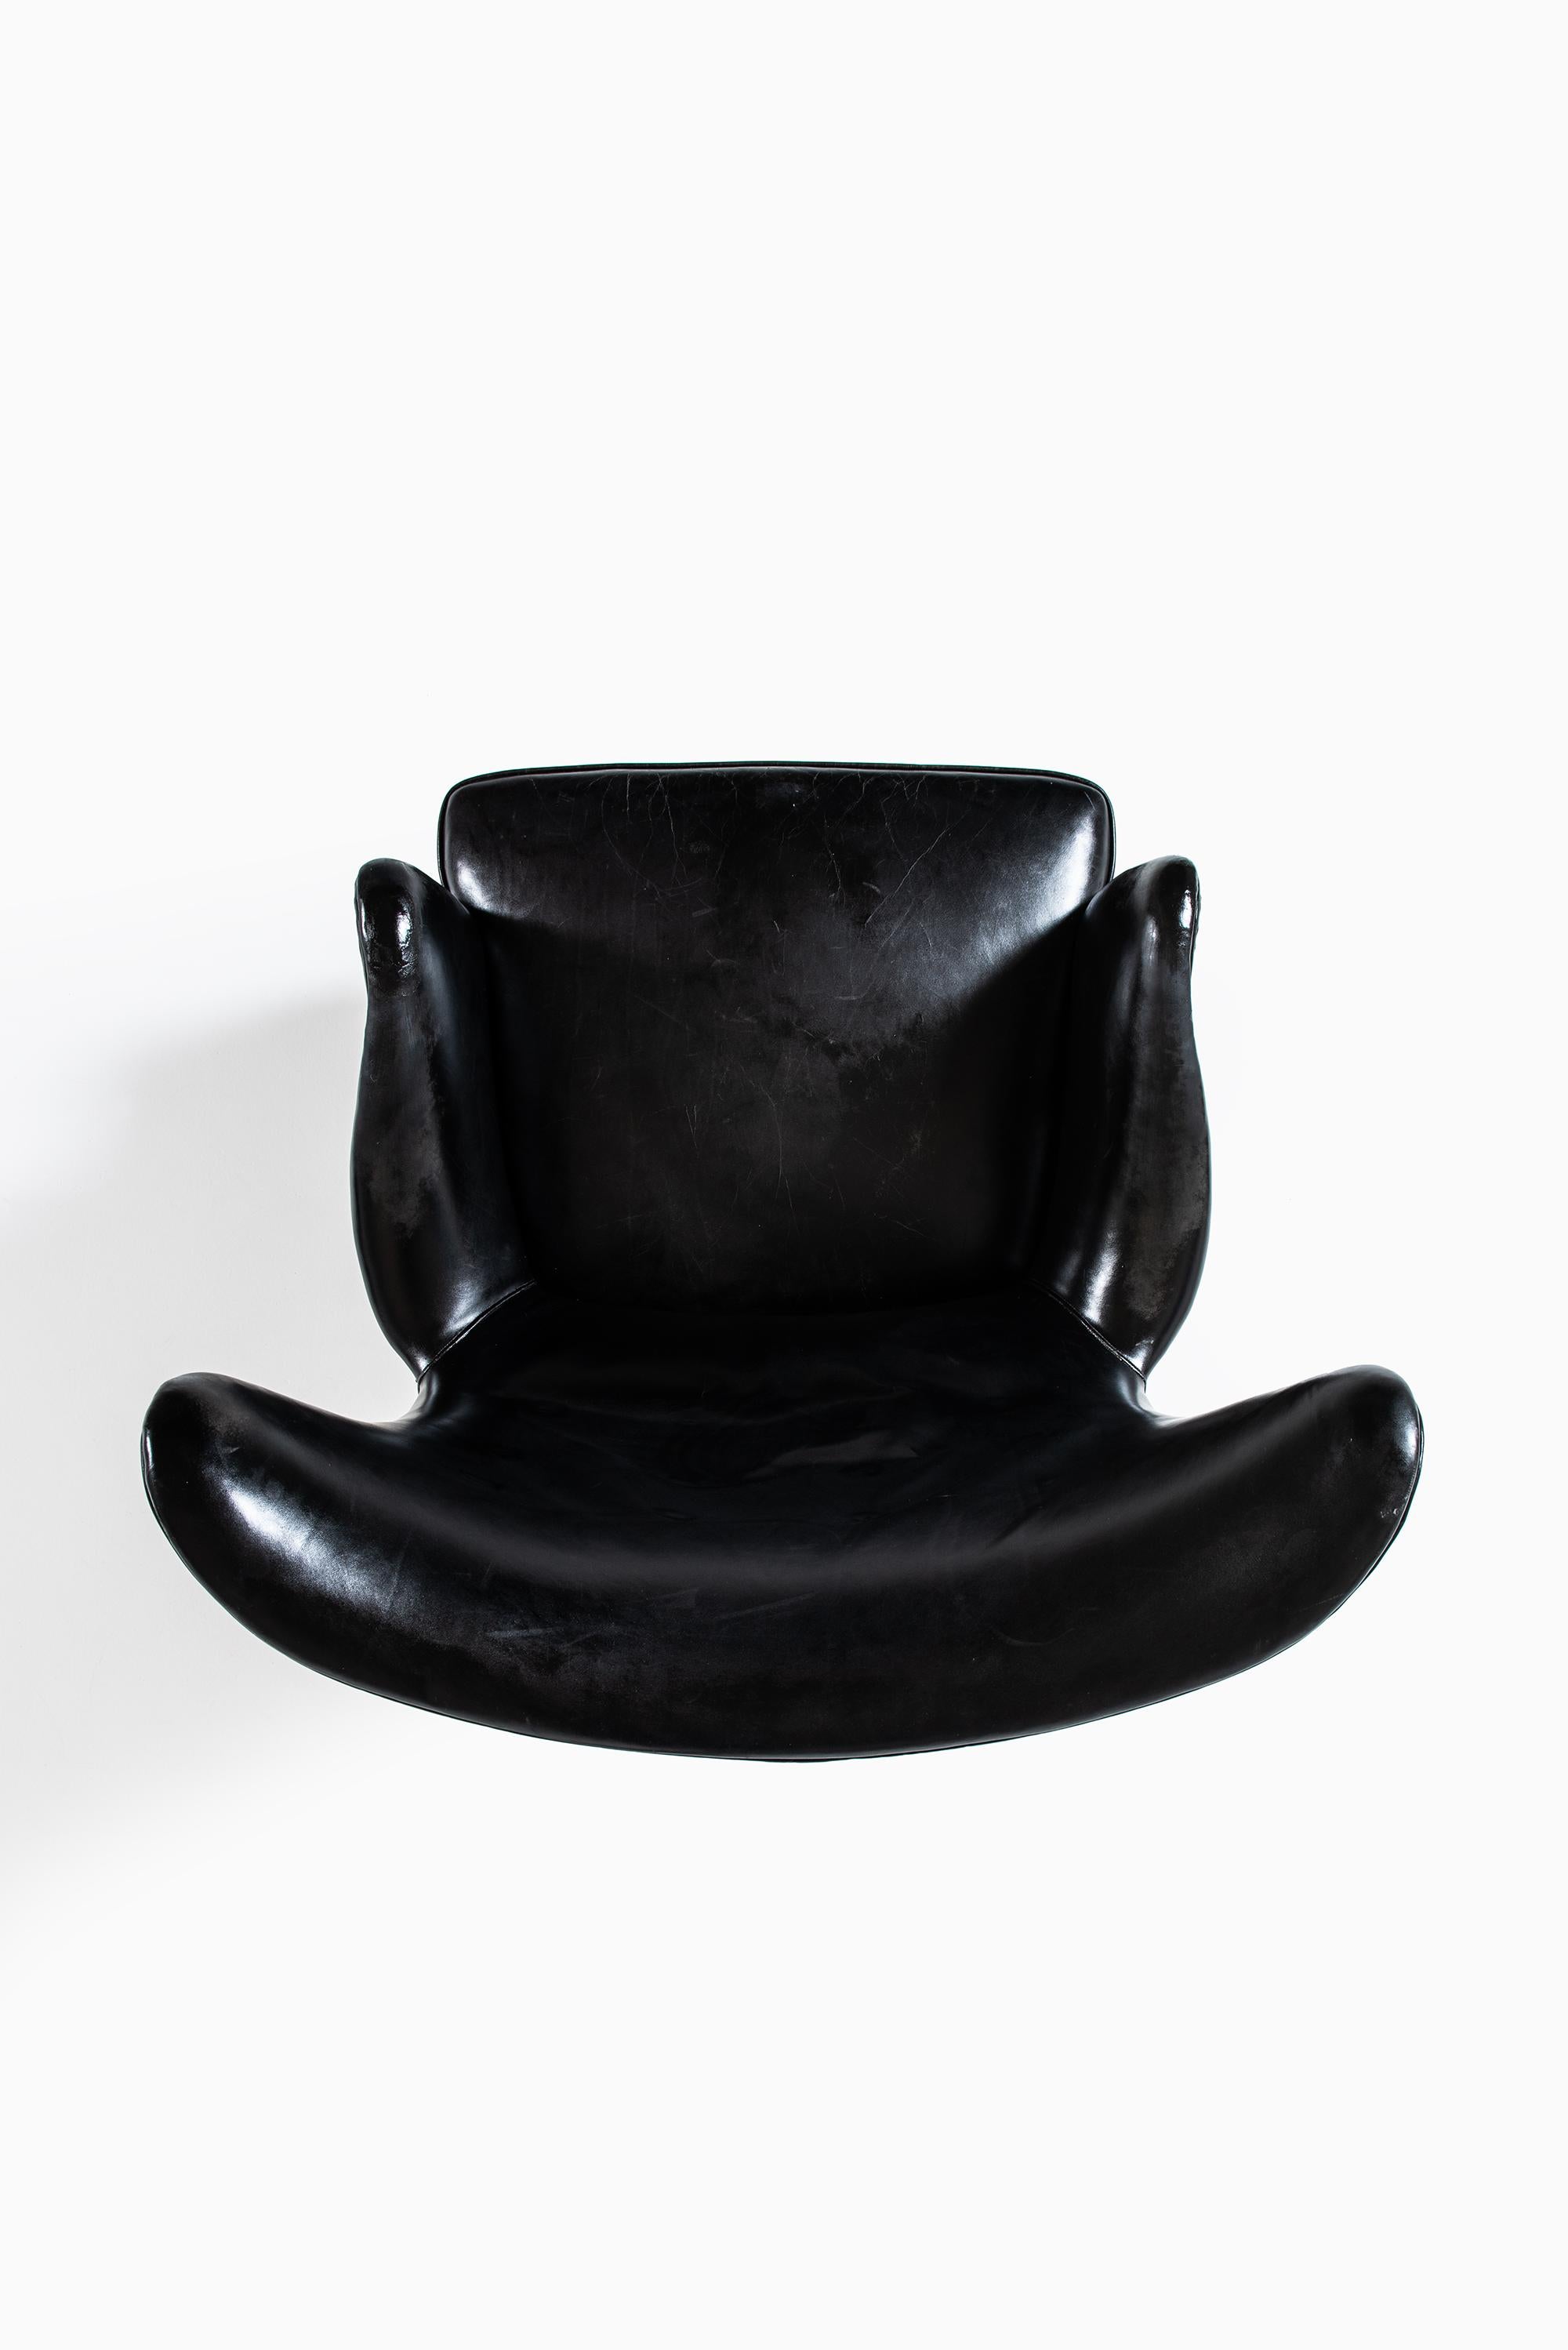 Leather Frits Henningsen Easy Chair from 1935 Produced in Denmark For Sale